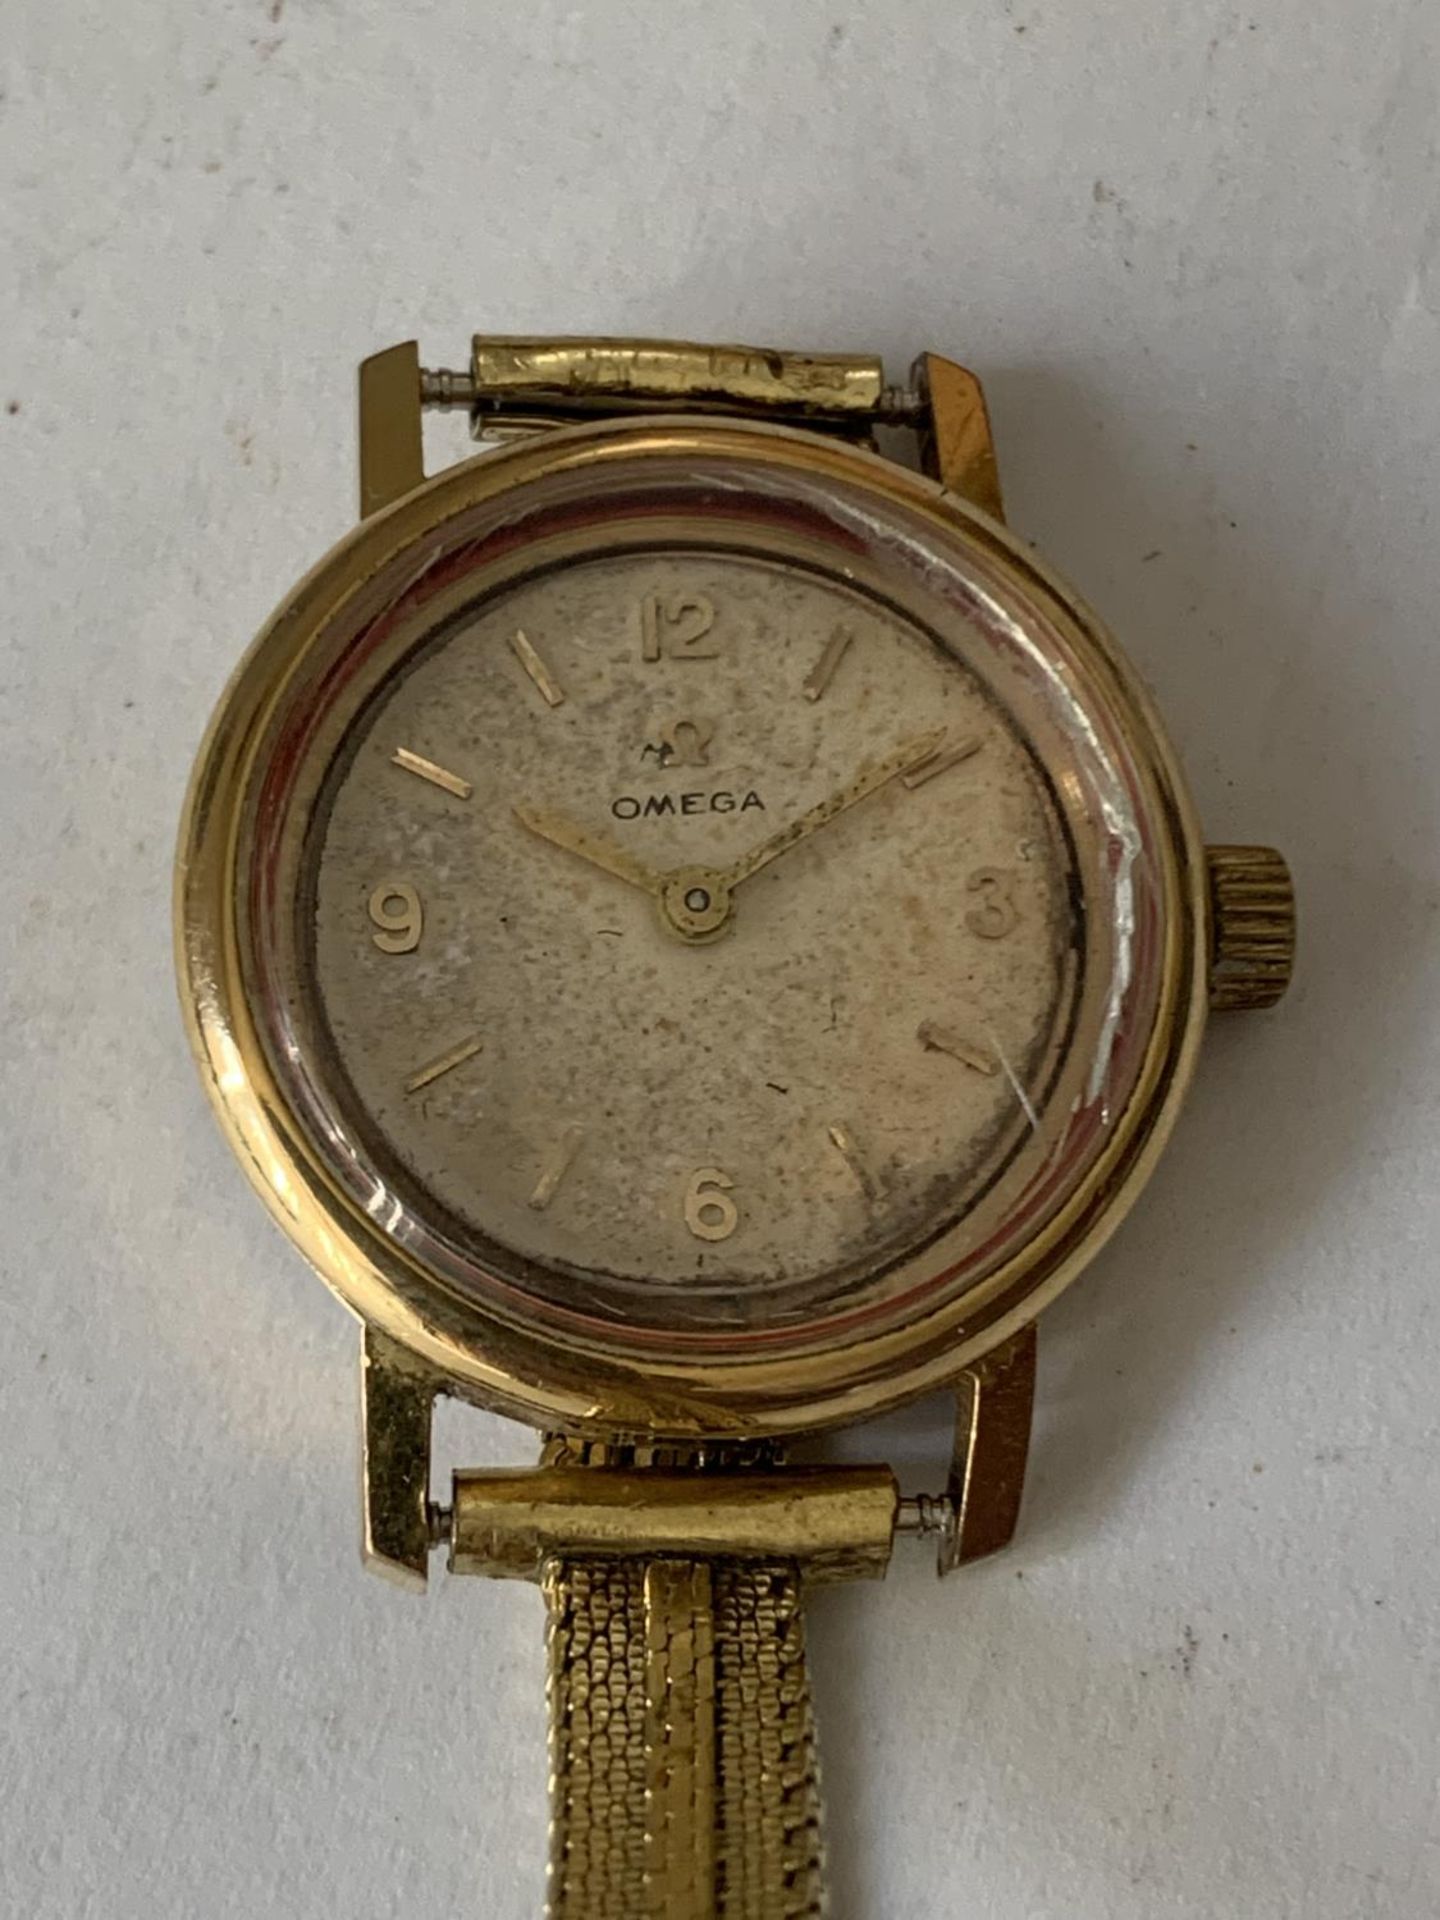 AN OMEGA LADIES WRIST WATCH - Image 2 of 3